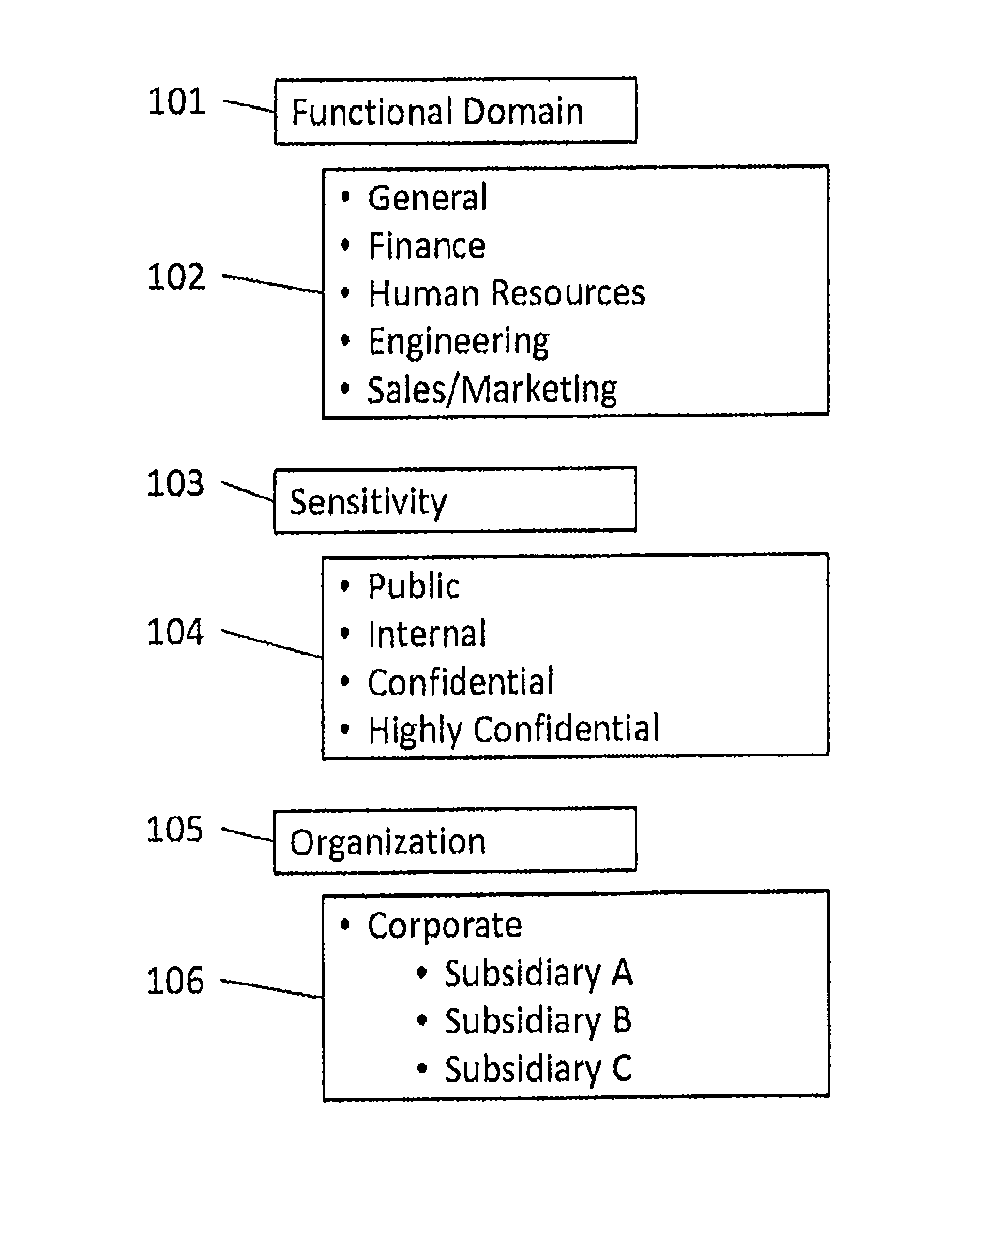 Context-based data classification